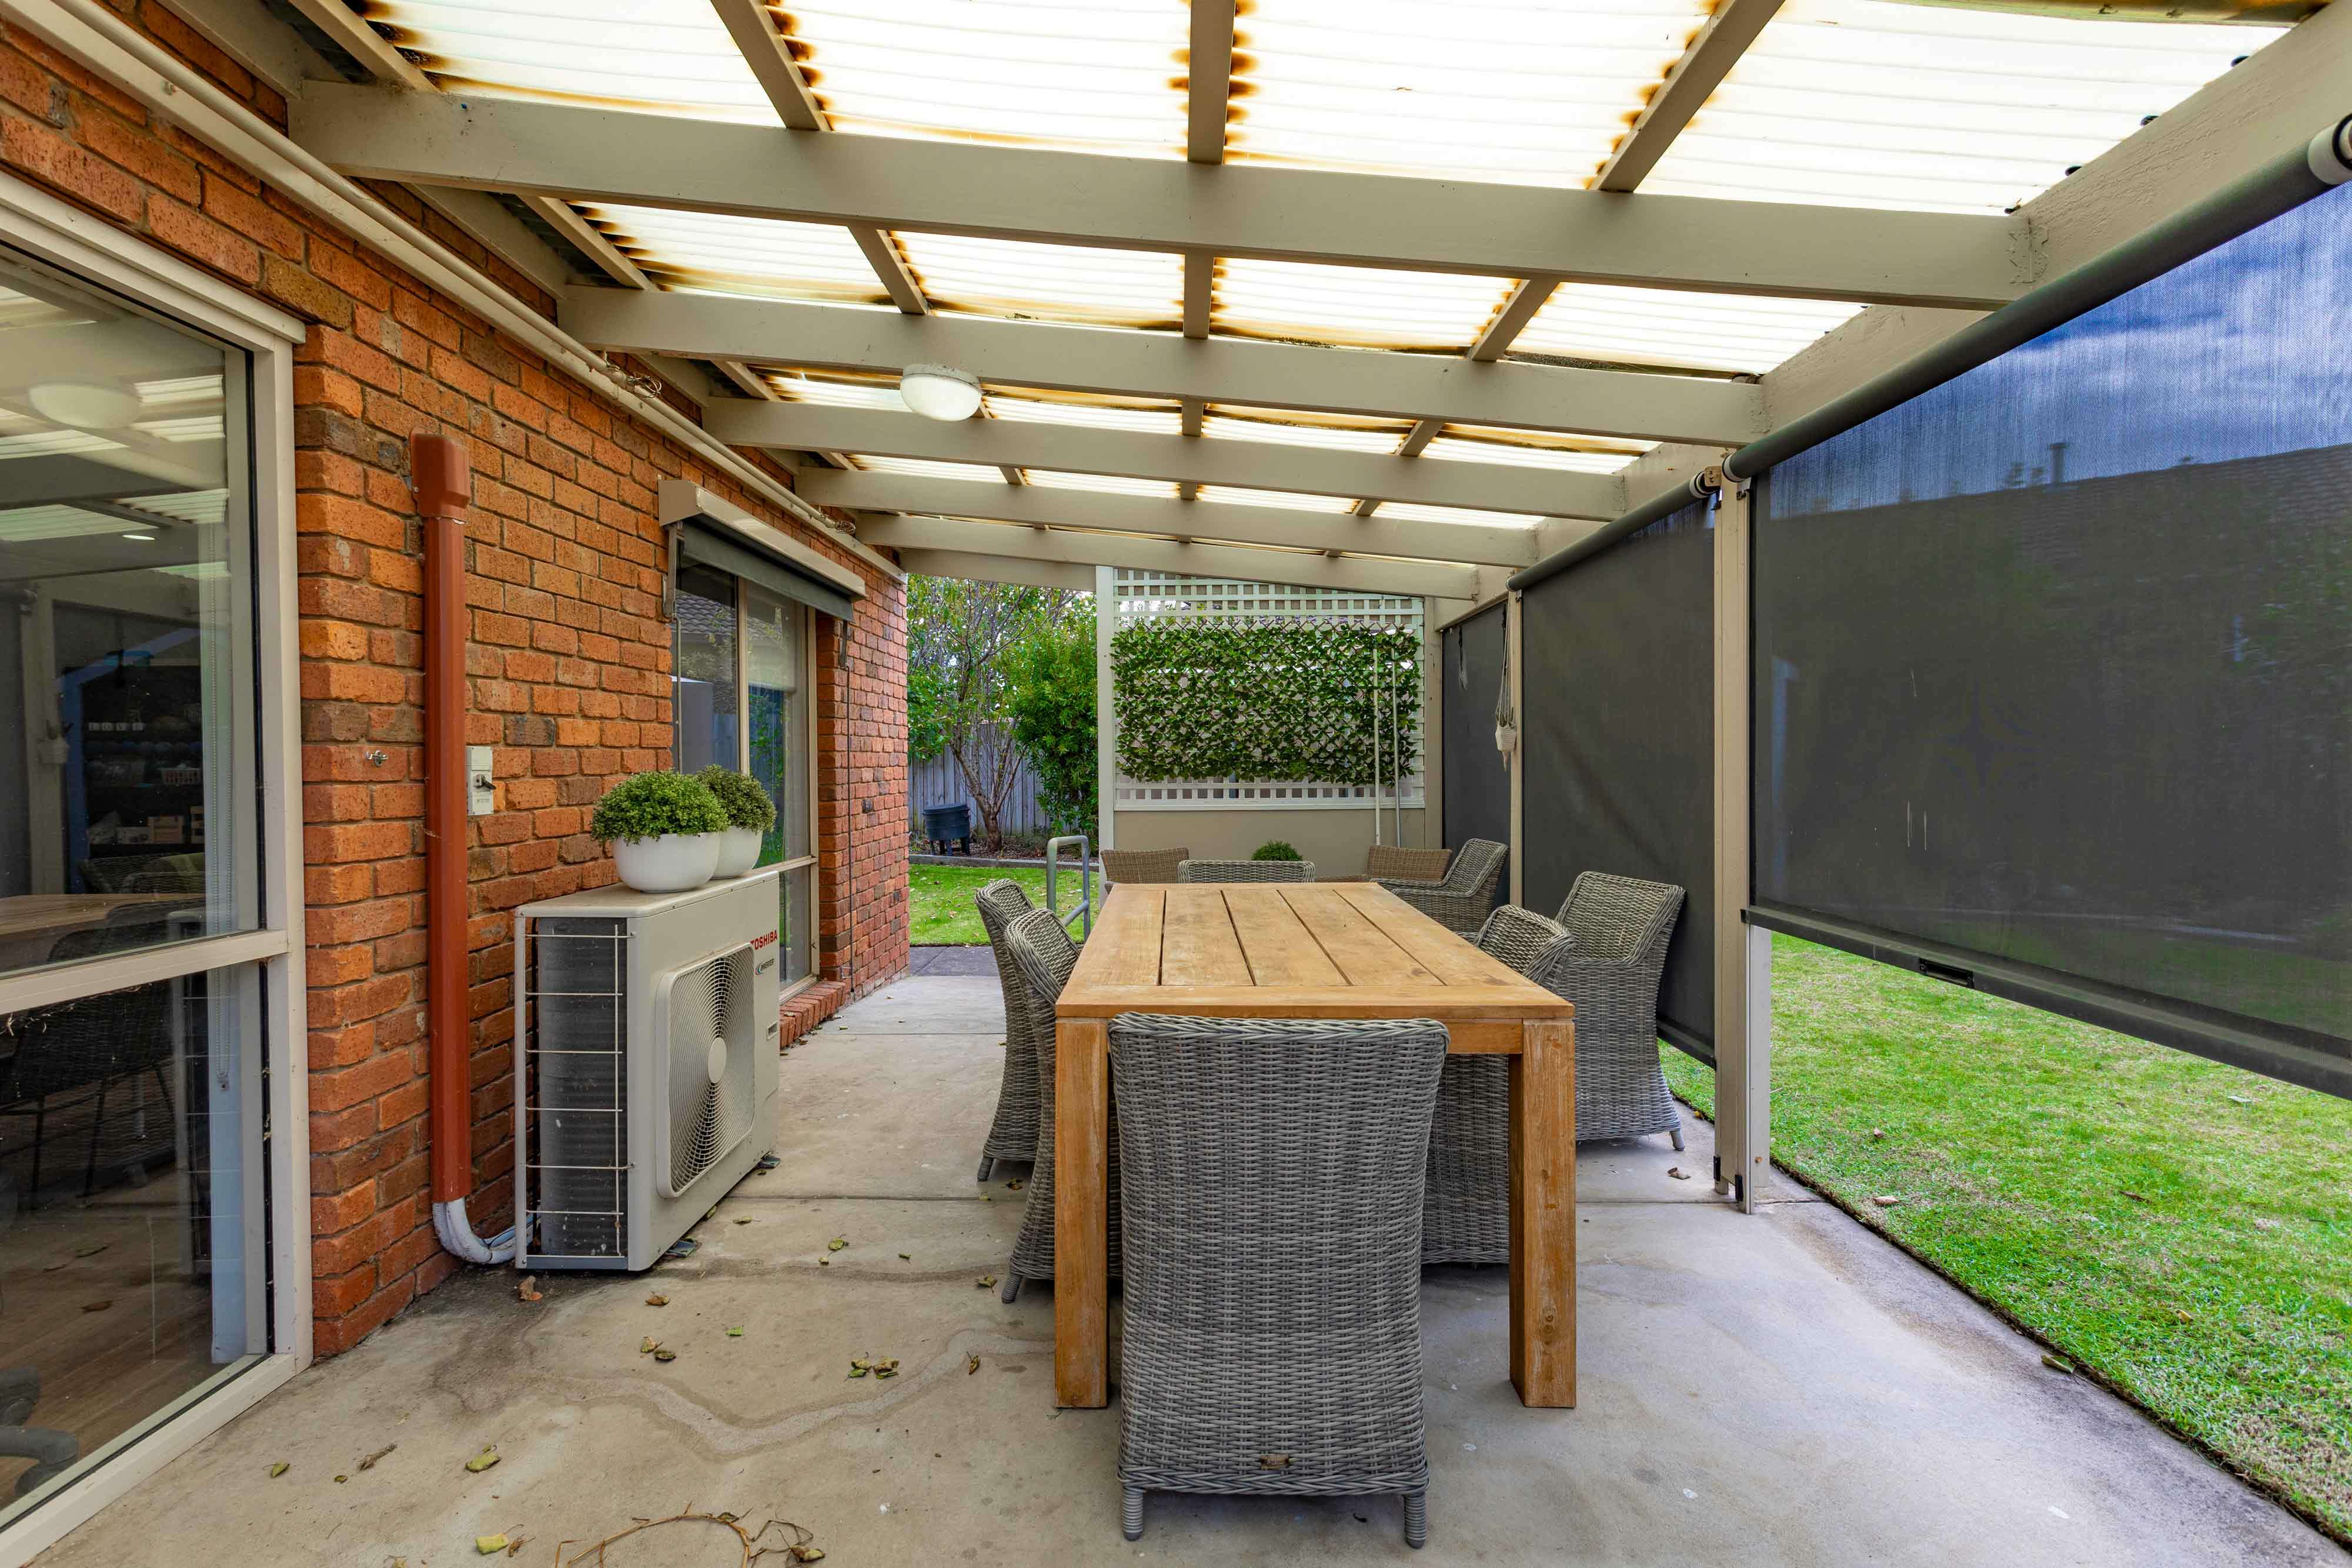 Undercover outdoor seating area with wooden table